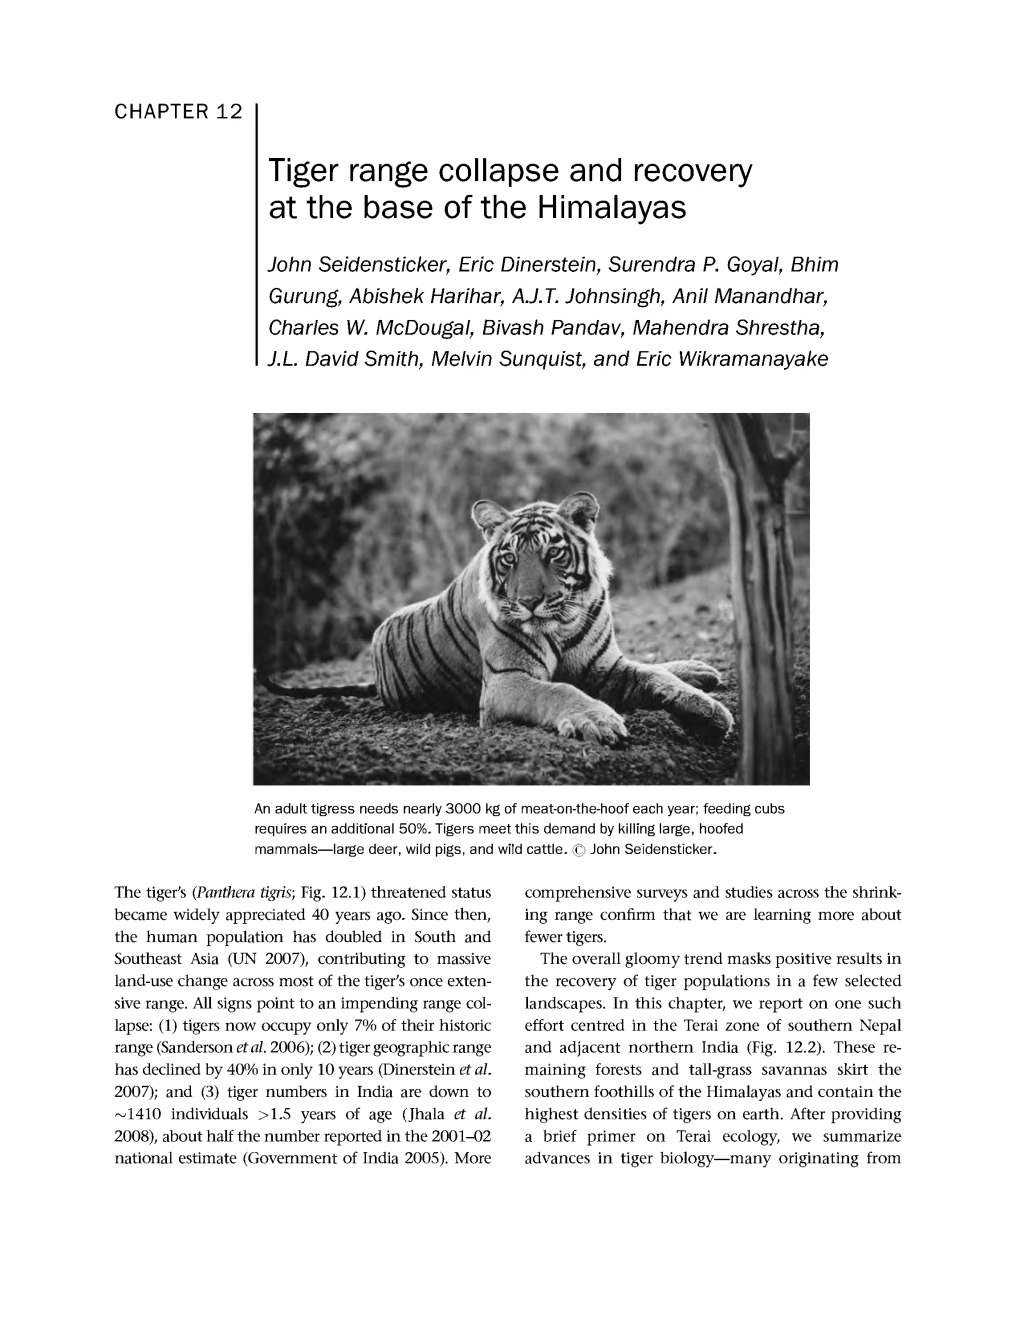 Tiger Range Collapse and Recovery at the Base of the Himalayas